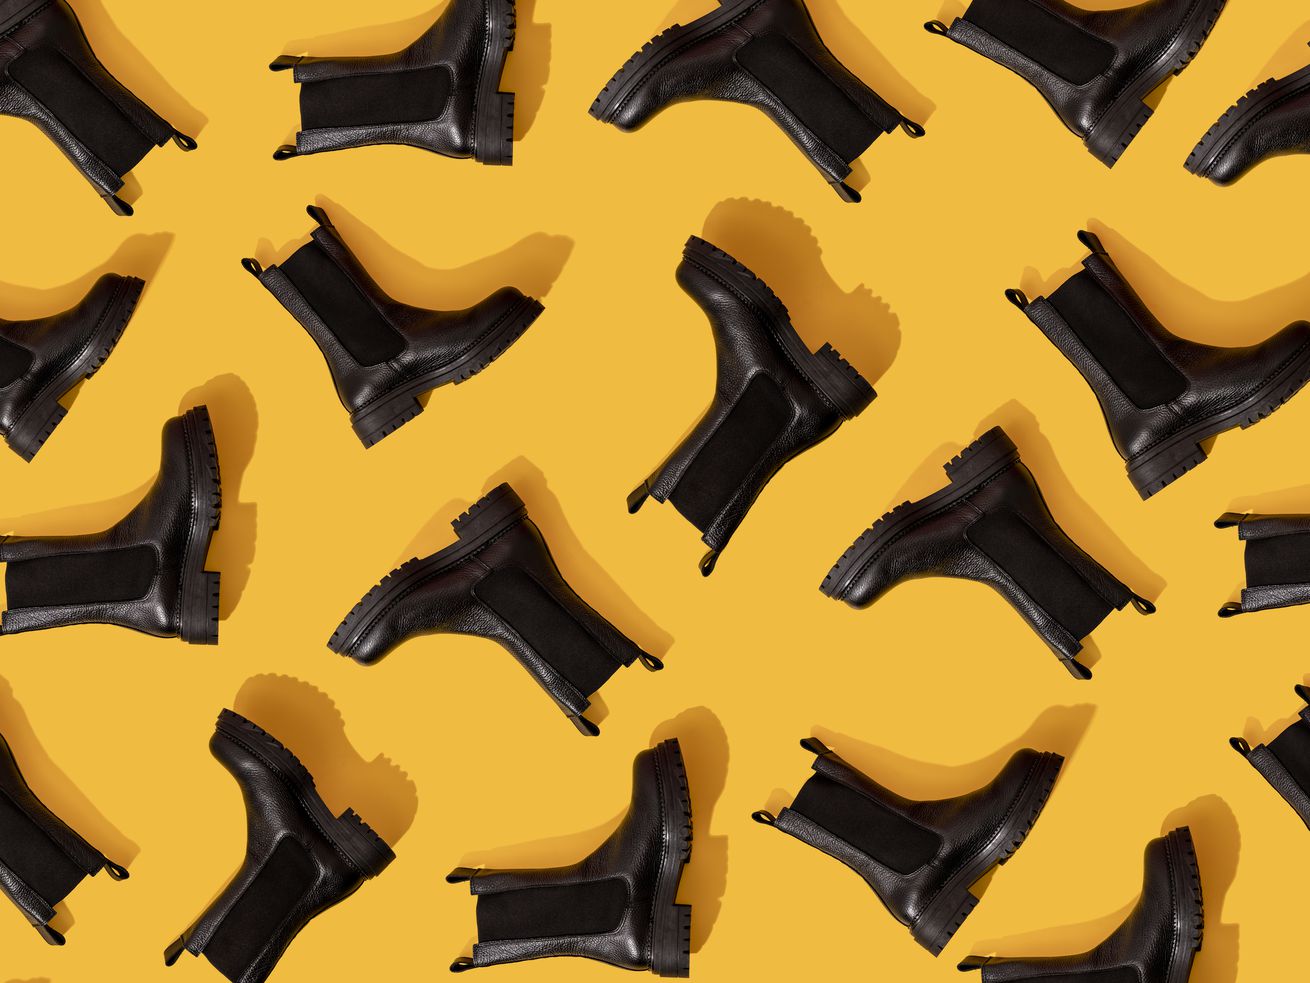 Black ankle boots arranged on a yellow background.